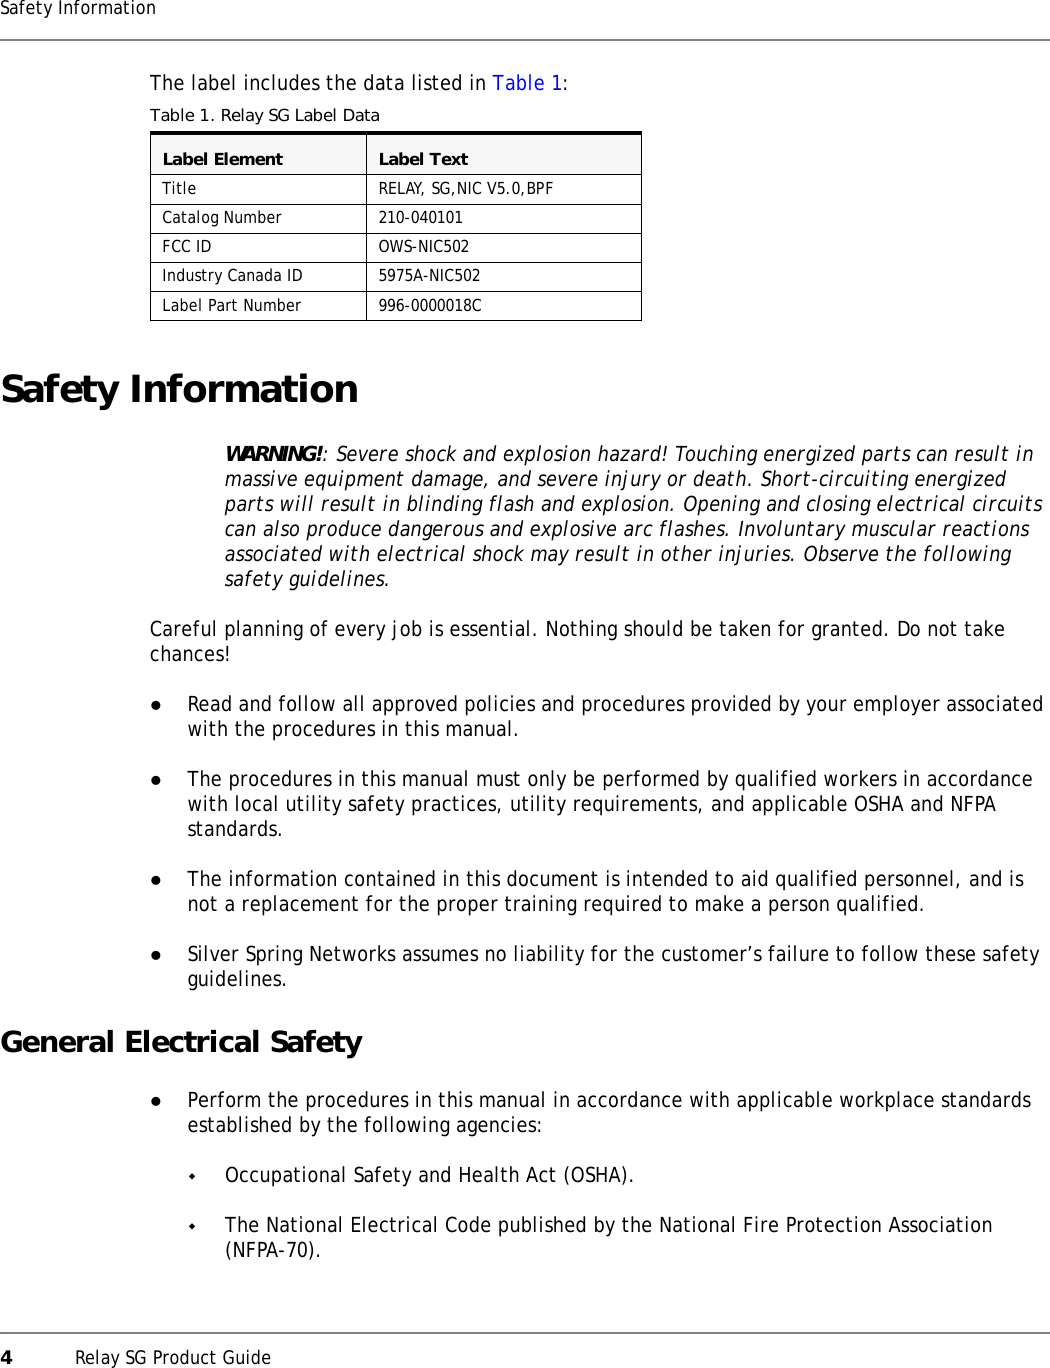 4Relay SG Product GuideSafety InformationThe label includes the data listed in Table 1:Safety InformationWARNING!: Severe shock and explosion hazard! Touching energized parts can result in massive equipment damage, and severe injury or death. Short-circuiting energized parts will result in blinding flash and explosion. Opening and closing electrical circuits can also produce dangerous and explosive arc flashes. Involuntary muscular reactions associated with electrical shock may result in other injuries. Observe the following safety guidelines.Careful planning of every job is essential. Nothing should be taken for granted. Do not take chances!zRead and follow all approved policies and procedures provided by your employer associated with the procedures in this manual.zThe procedures in this manual must only be performed by qualified workers in accordance with local utility safety practices, utility requirements, and applicable OSHA and NFPA standards.zThe information contained in this document is intended to aid qualified personnel, and is not a replacement for the proper training required to make a person qualified.zSilver Spring Networks assumes no liability for the customer’s failure to follow these safety guidelines.General Electrical SafetyzPerform the procedures in this manual in accordance with applicable workplace standards established by the following agencies:Occupational Safety and Health Act (OSHA).The National Electrical Code published by the National Fire Protection Association (NFPA-70).Table 1. Relay SG Label DataLabel Element Label TextTitle RELAY, SG,NIC V5.0,BPFCatalog Number 210-040101FCC ID OWS-NIC502Industry Canada ID 5975A-NIC502Label Part Number 996-0000018C